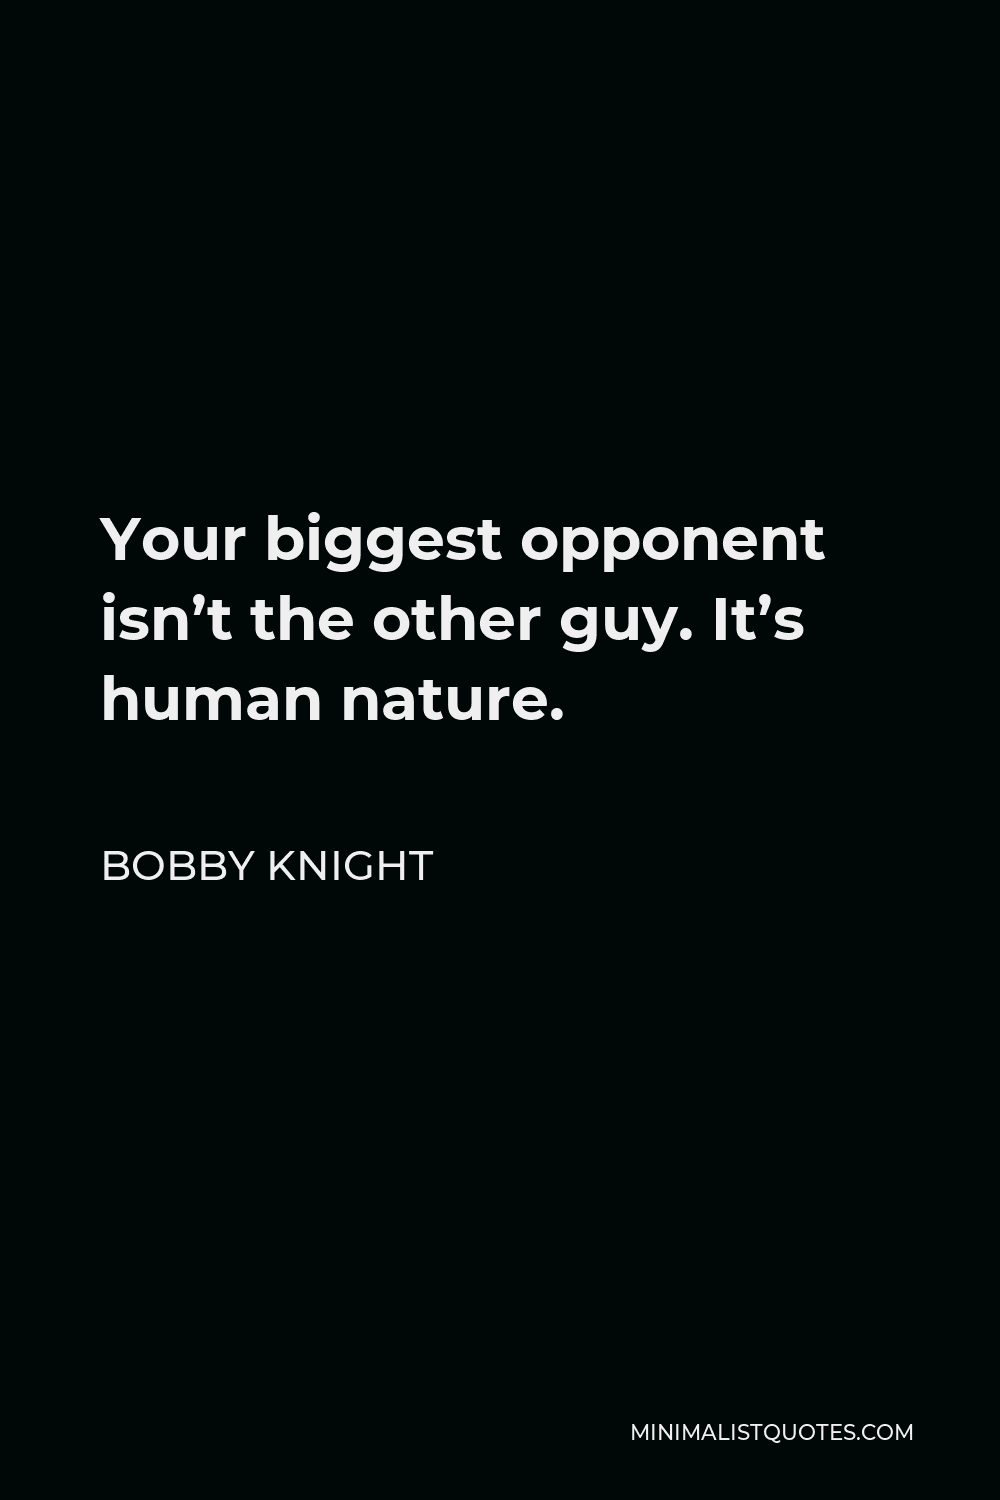 Bobby Knight Quote - Your biggest opponent isn’t the other guy. It’s human nature.